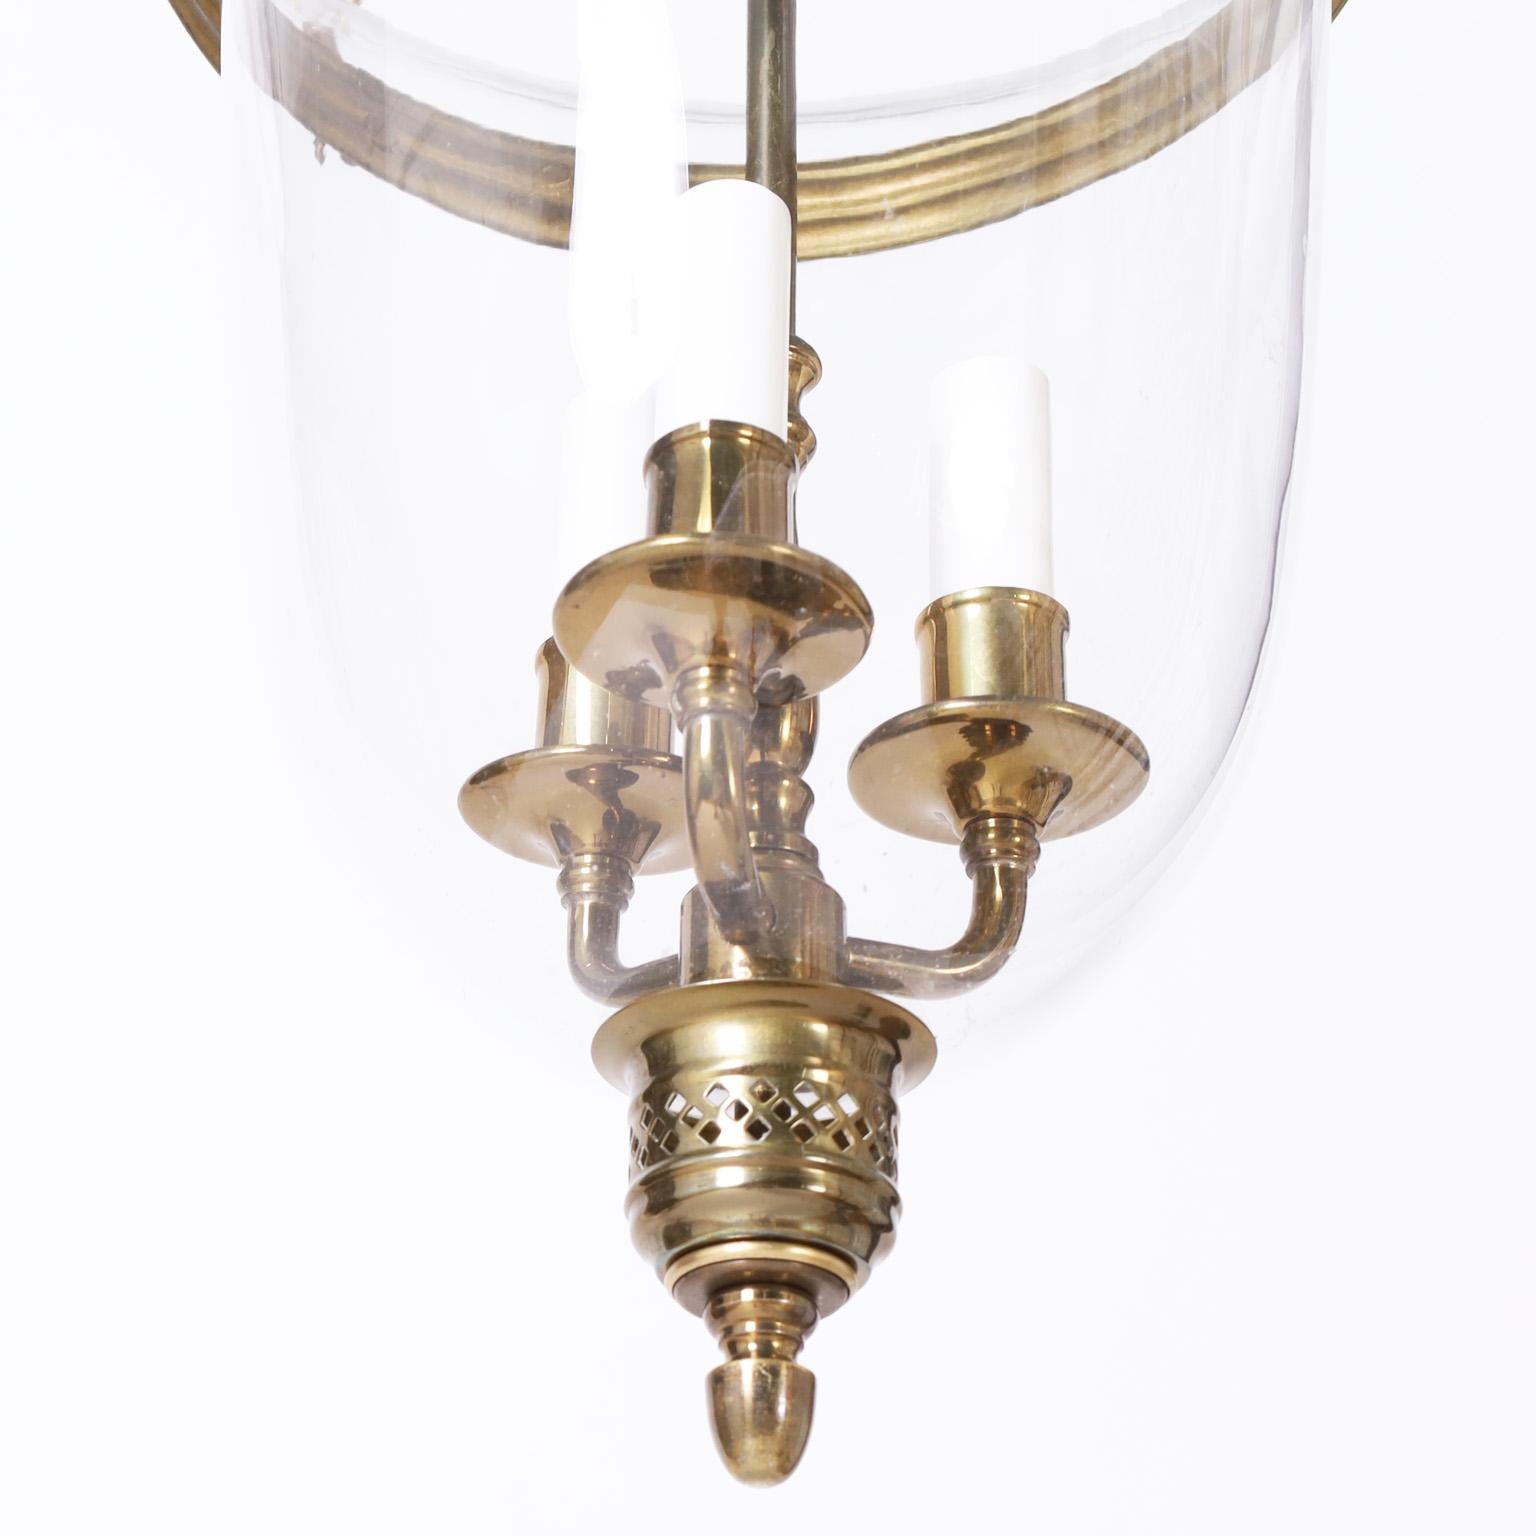 British Colonial Style Glass Lantern or Pendant In Good Condition For Sale In Palm Beach, FL